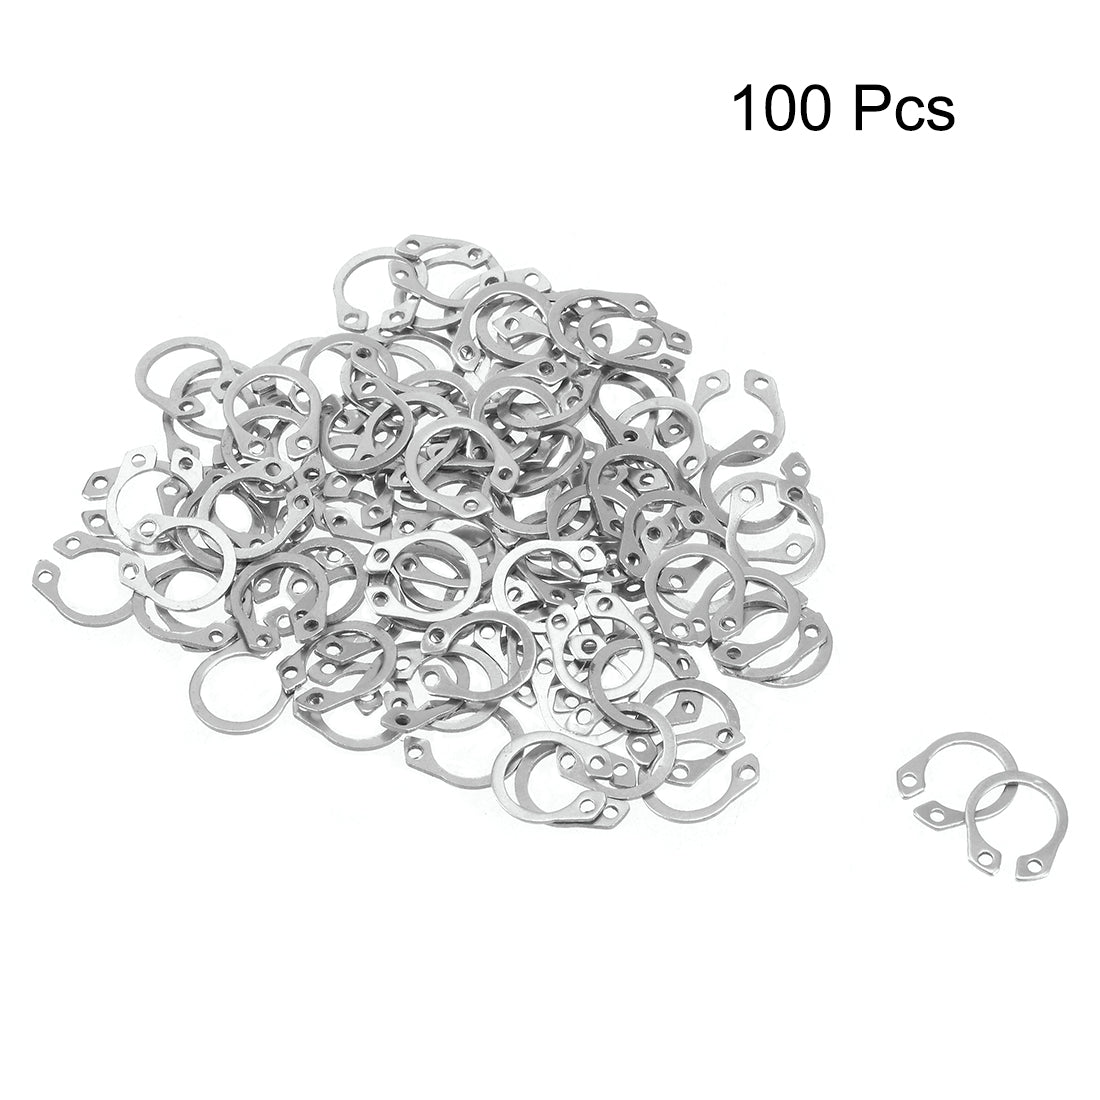 uxcell Uxcell 12.8mm External Circlips Retaining Shaft Snap Rings 304 Stainless Steel 100pcs